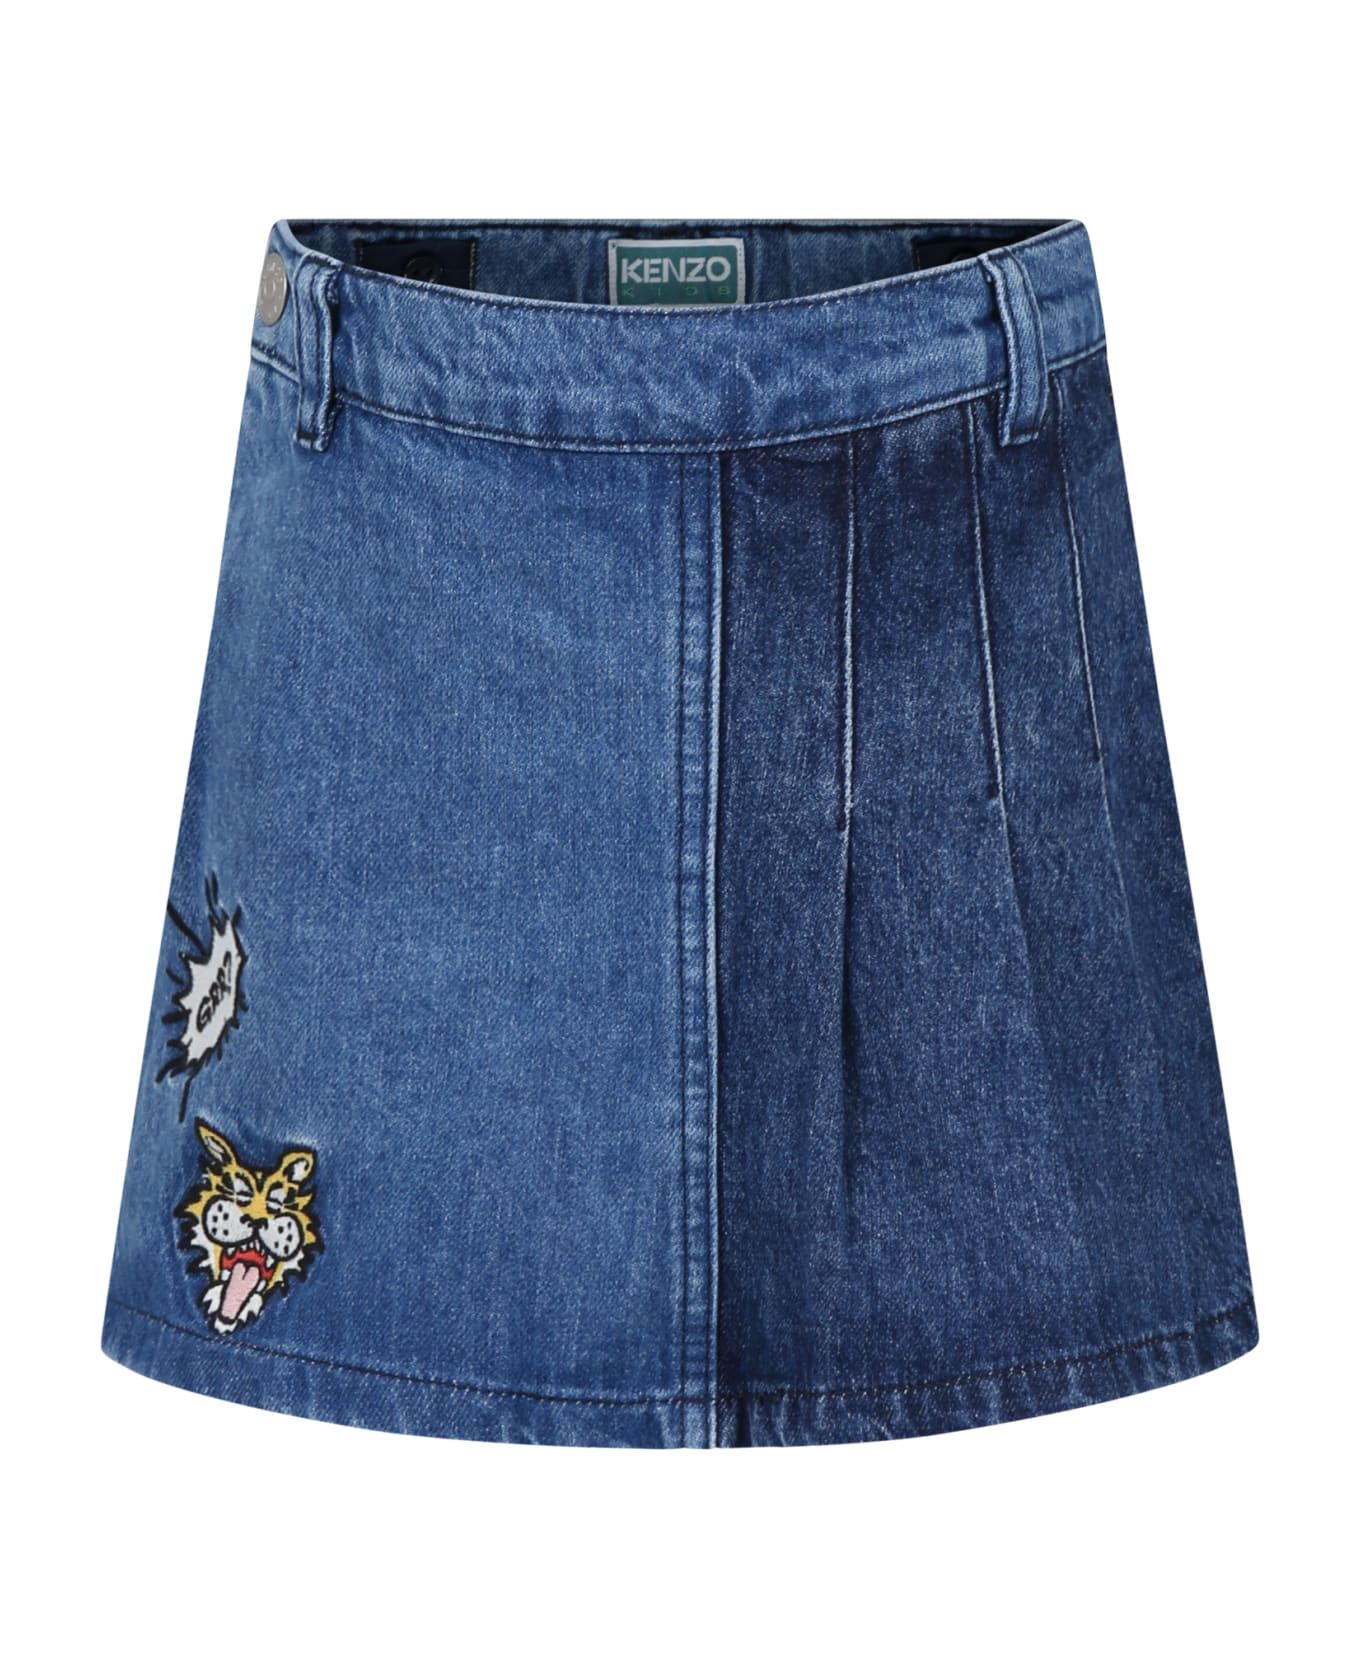 Kenzo Kids Denim Shorts For Girl With Multicolor Embroidery - Denim ボトムス